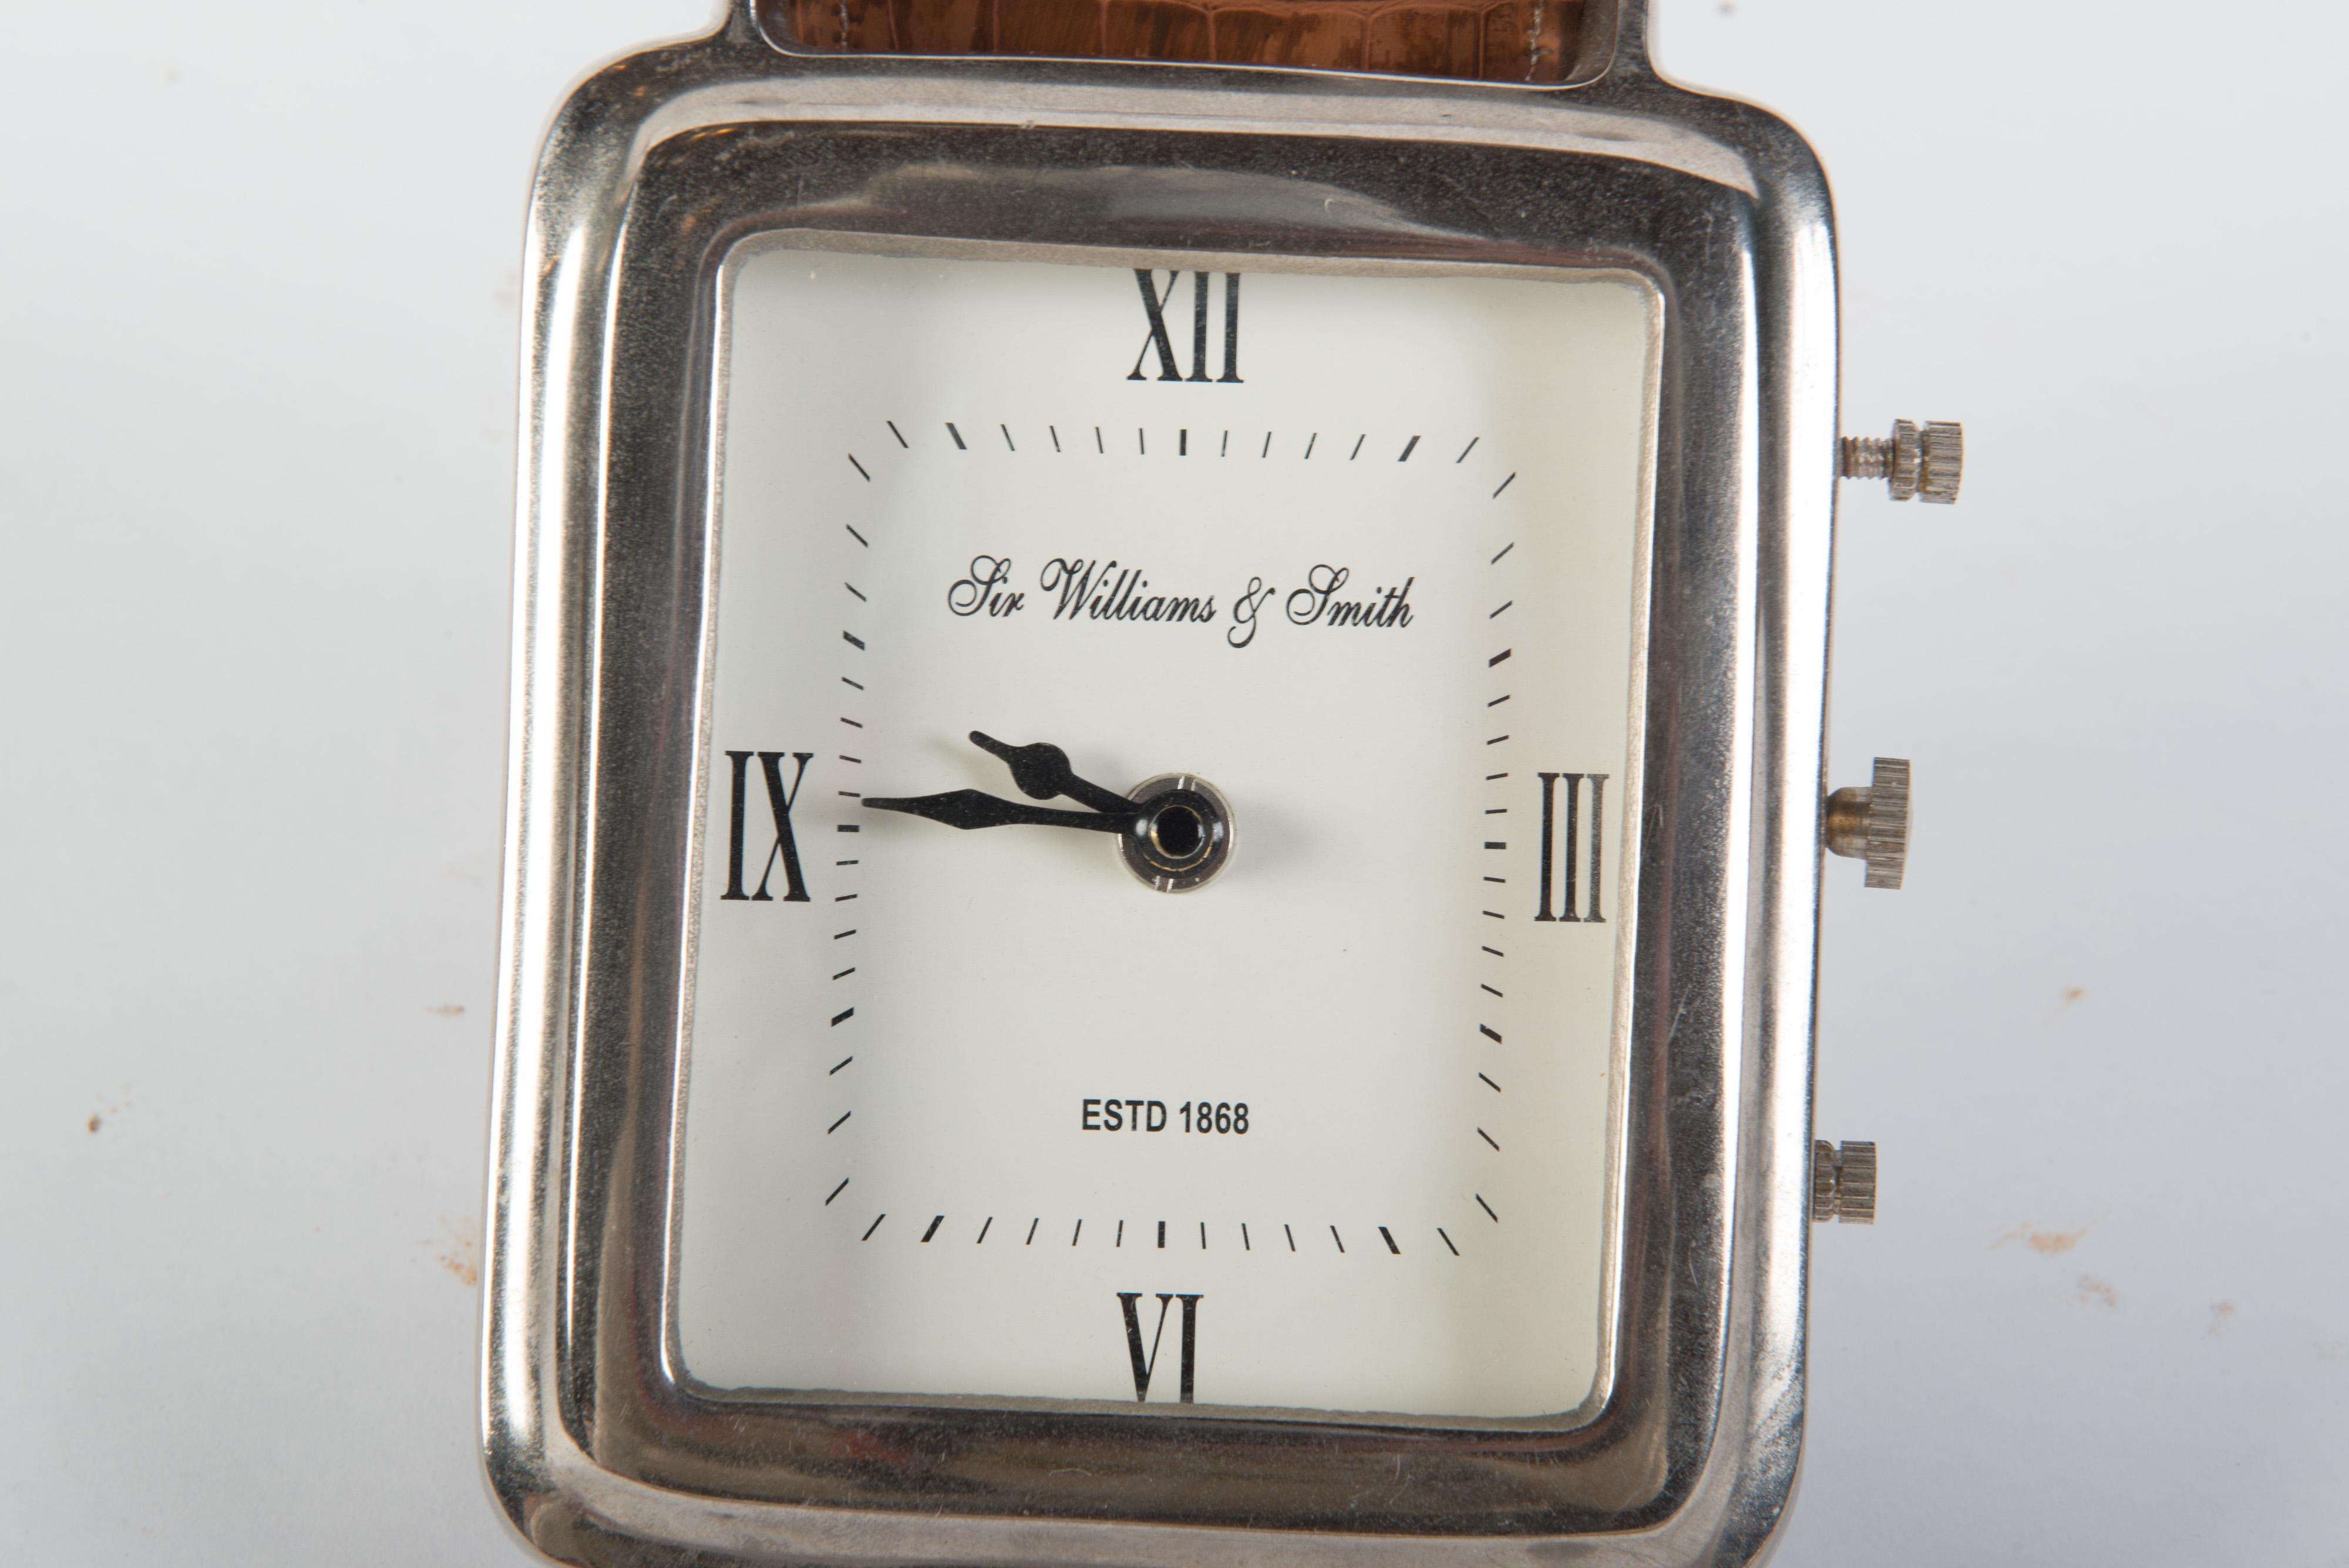 Sir Williams & Smith store display wrist watch desk clock with leather straps. Clock face is 5 inches by 6 inches high. Small metal piece stands the watch up at an angle. Battery operated.
 